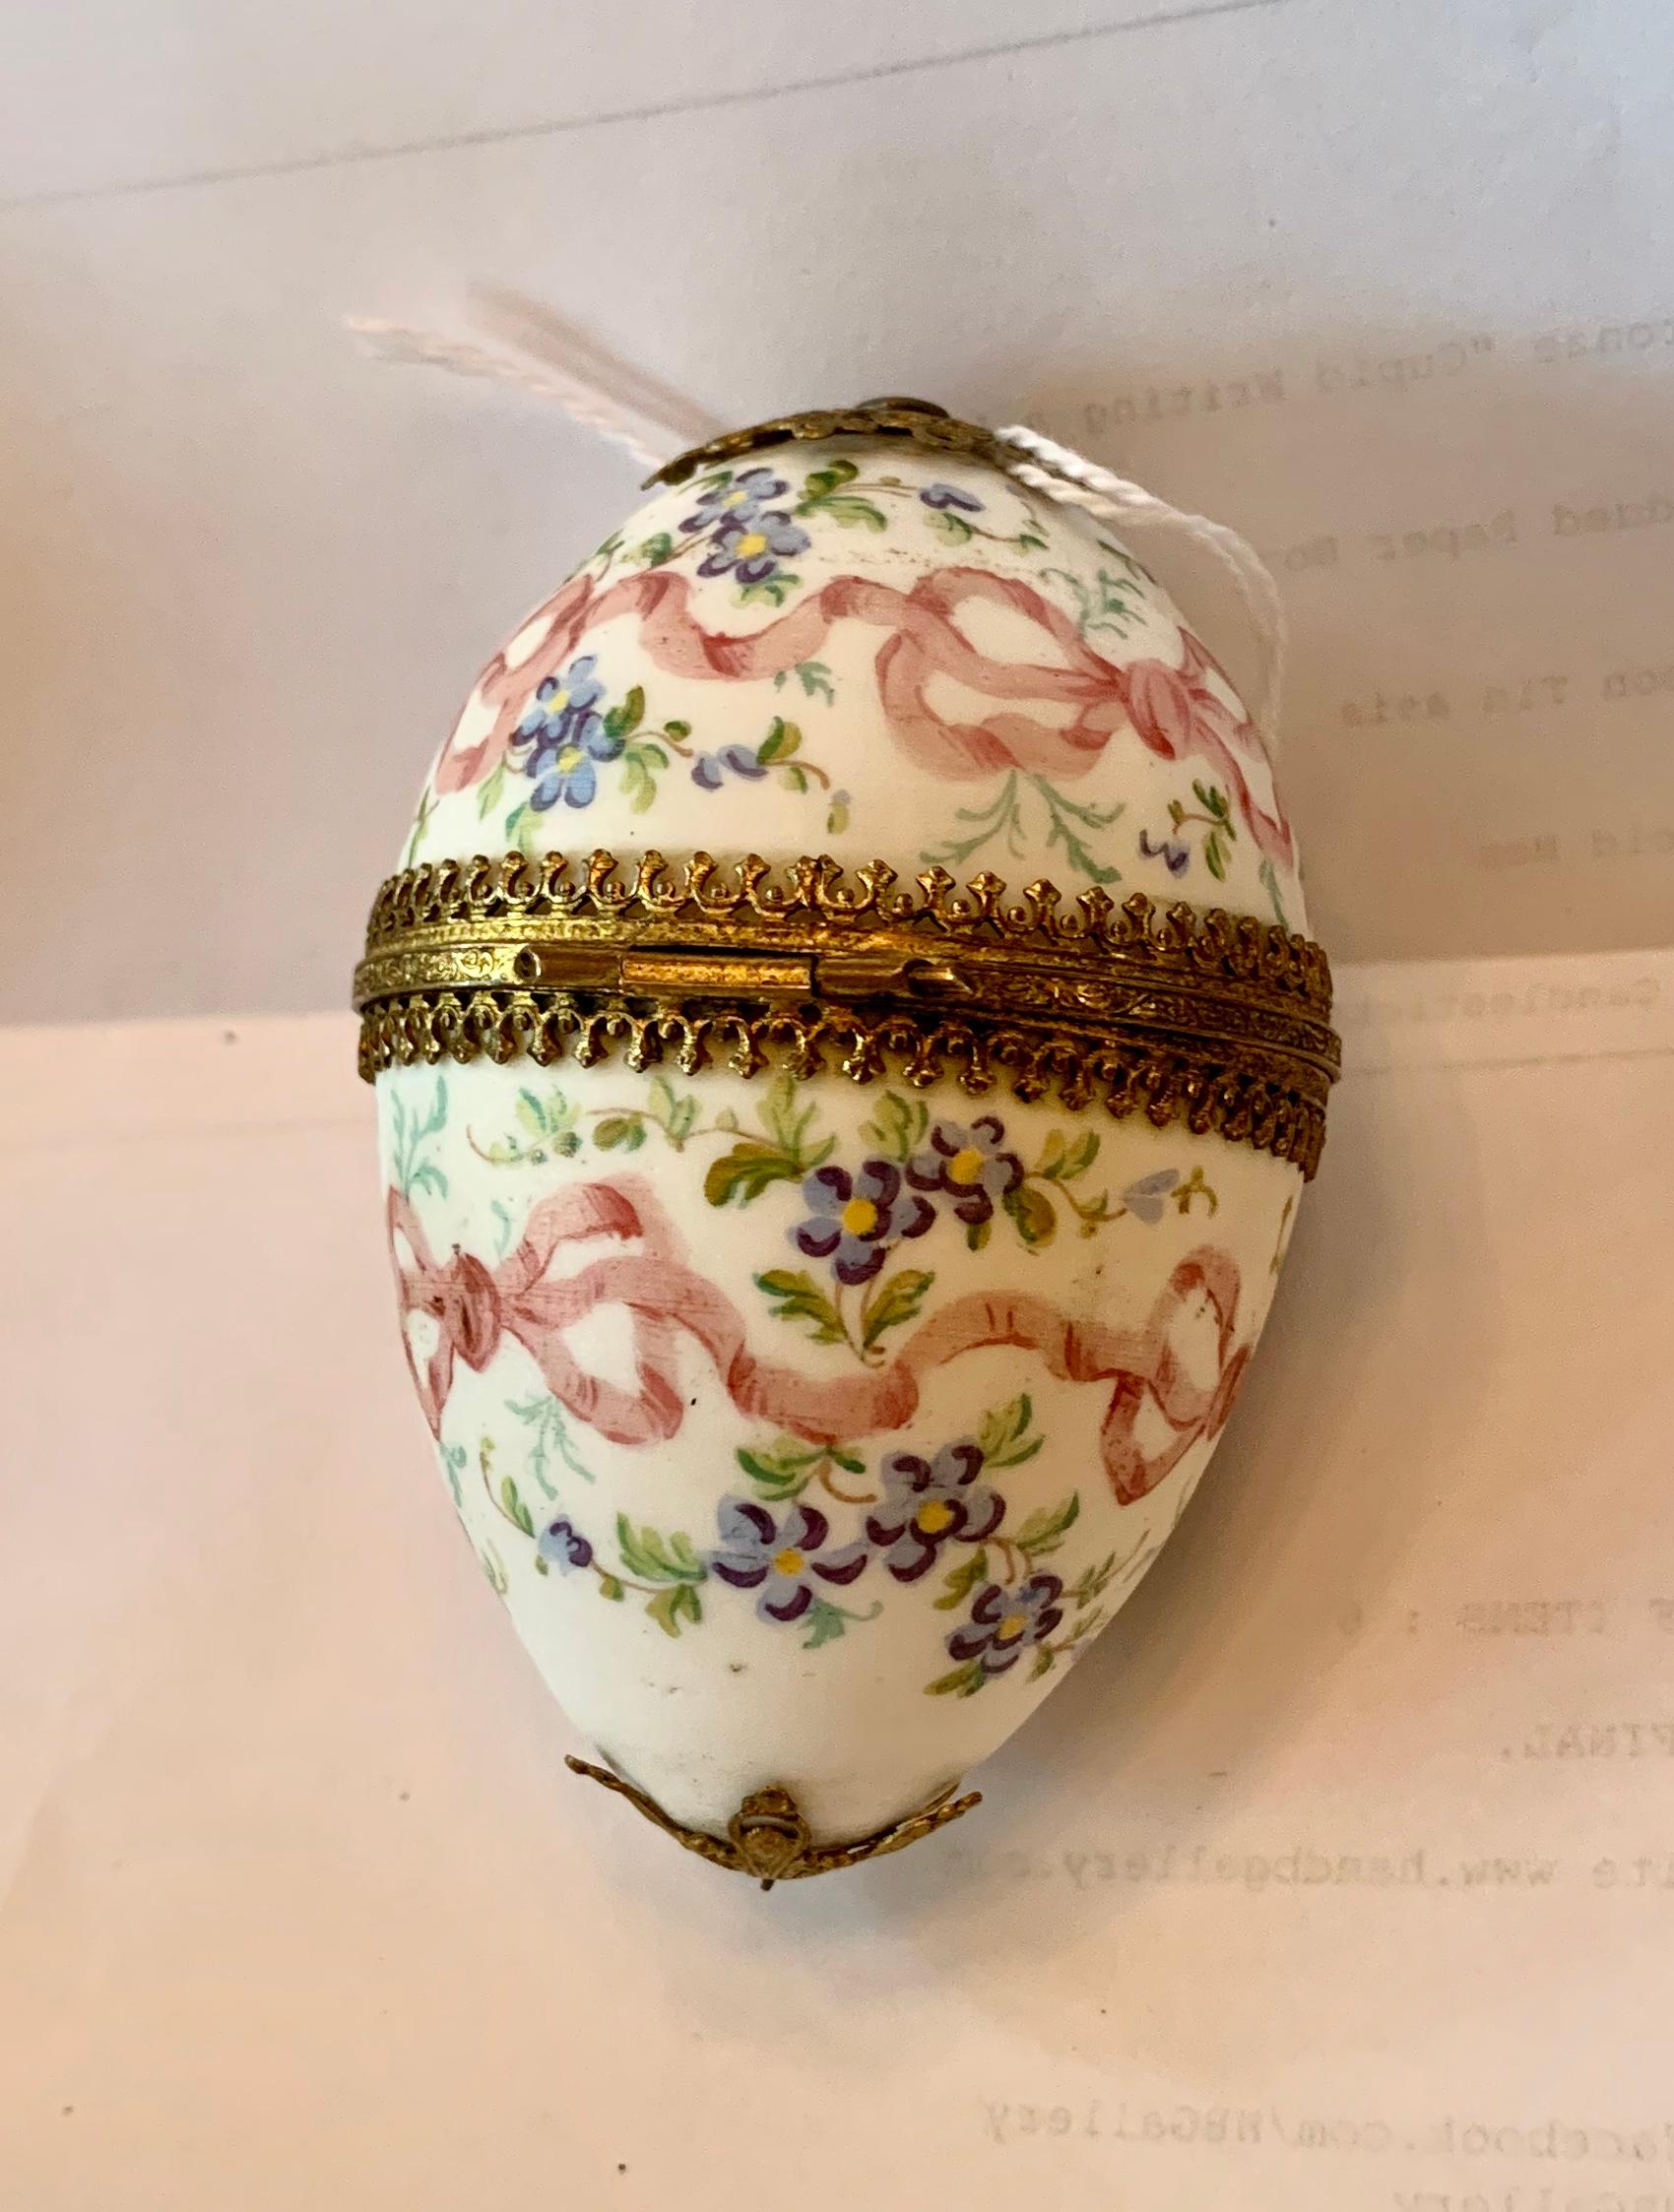 This is a stunning antique French Belle Epoque - Victorian egg box in porcelain with gilt ormolu mounting and hand painted decoration of pink ribbons and bows with Forget-me-not flowers.  The delicate romantic egg box is exquisite.  The hand painted